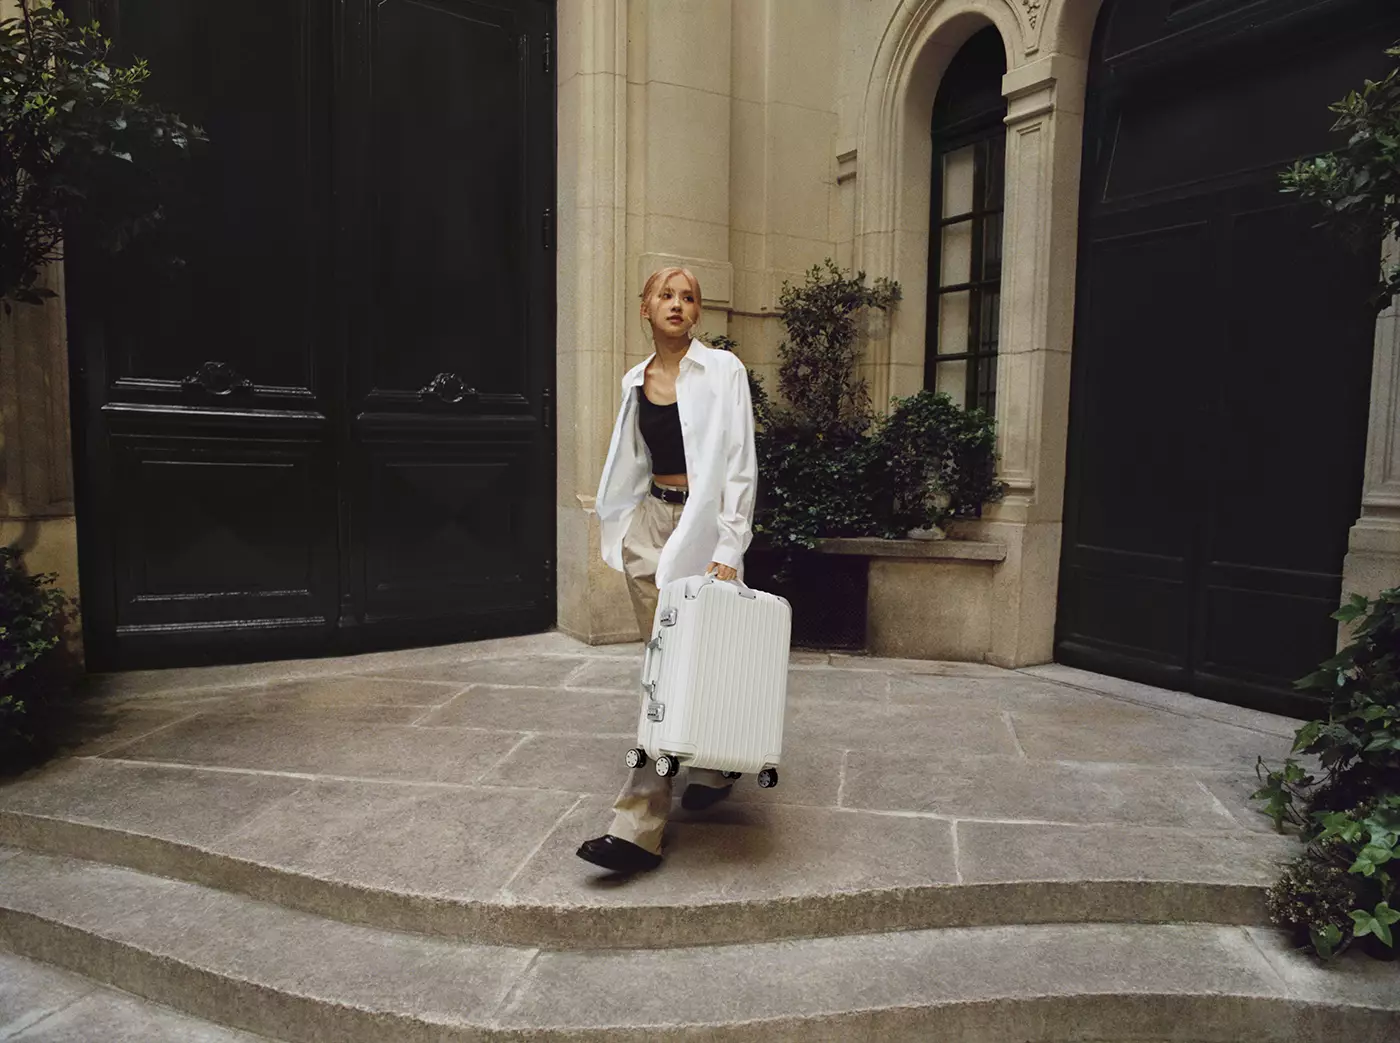 RIMOWA Fuses Lewis Hamilton, Rosé and Kylian MBappé's Journeys in the "Never Still" Campaign, Act 4